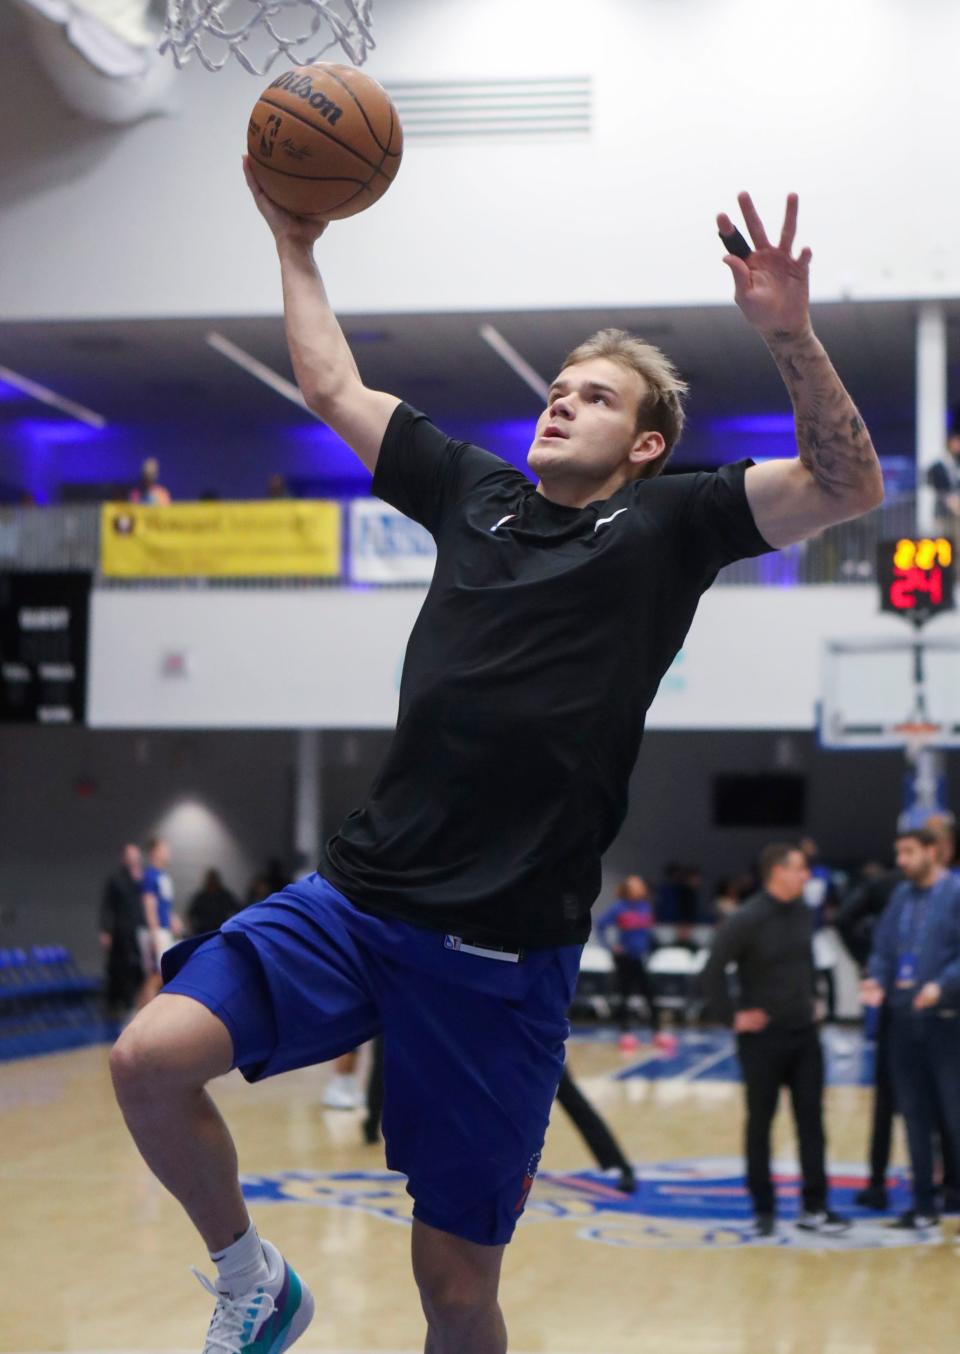 NBA slam dunk contest winner Mac McClung puts up a casual slam in warmups as he returns to the Blue Coats in a G-League game at the Chase Fieldhouse on Wednesday, Feb. 22, 2023.